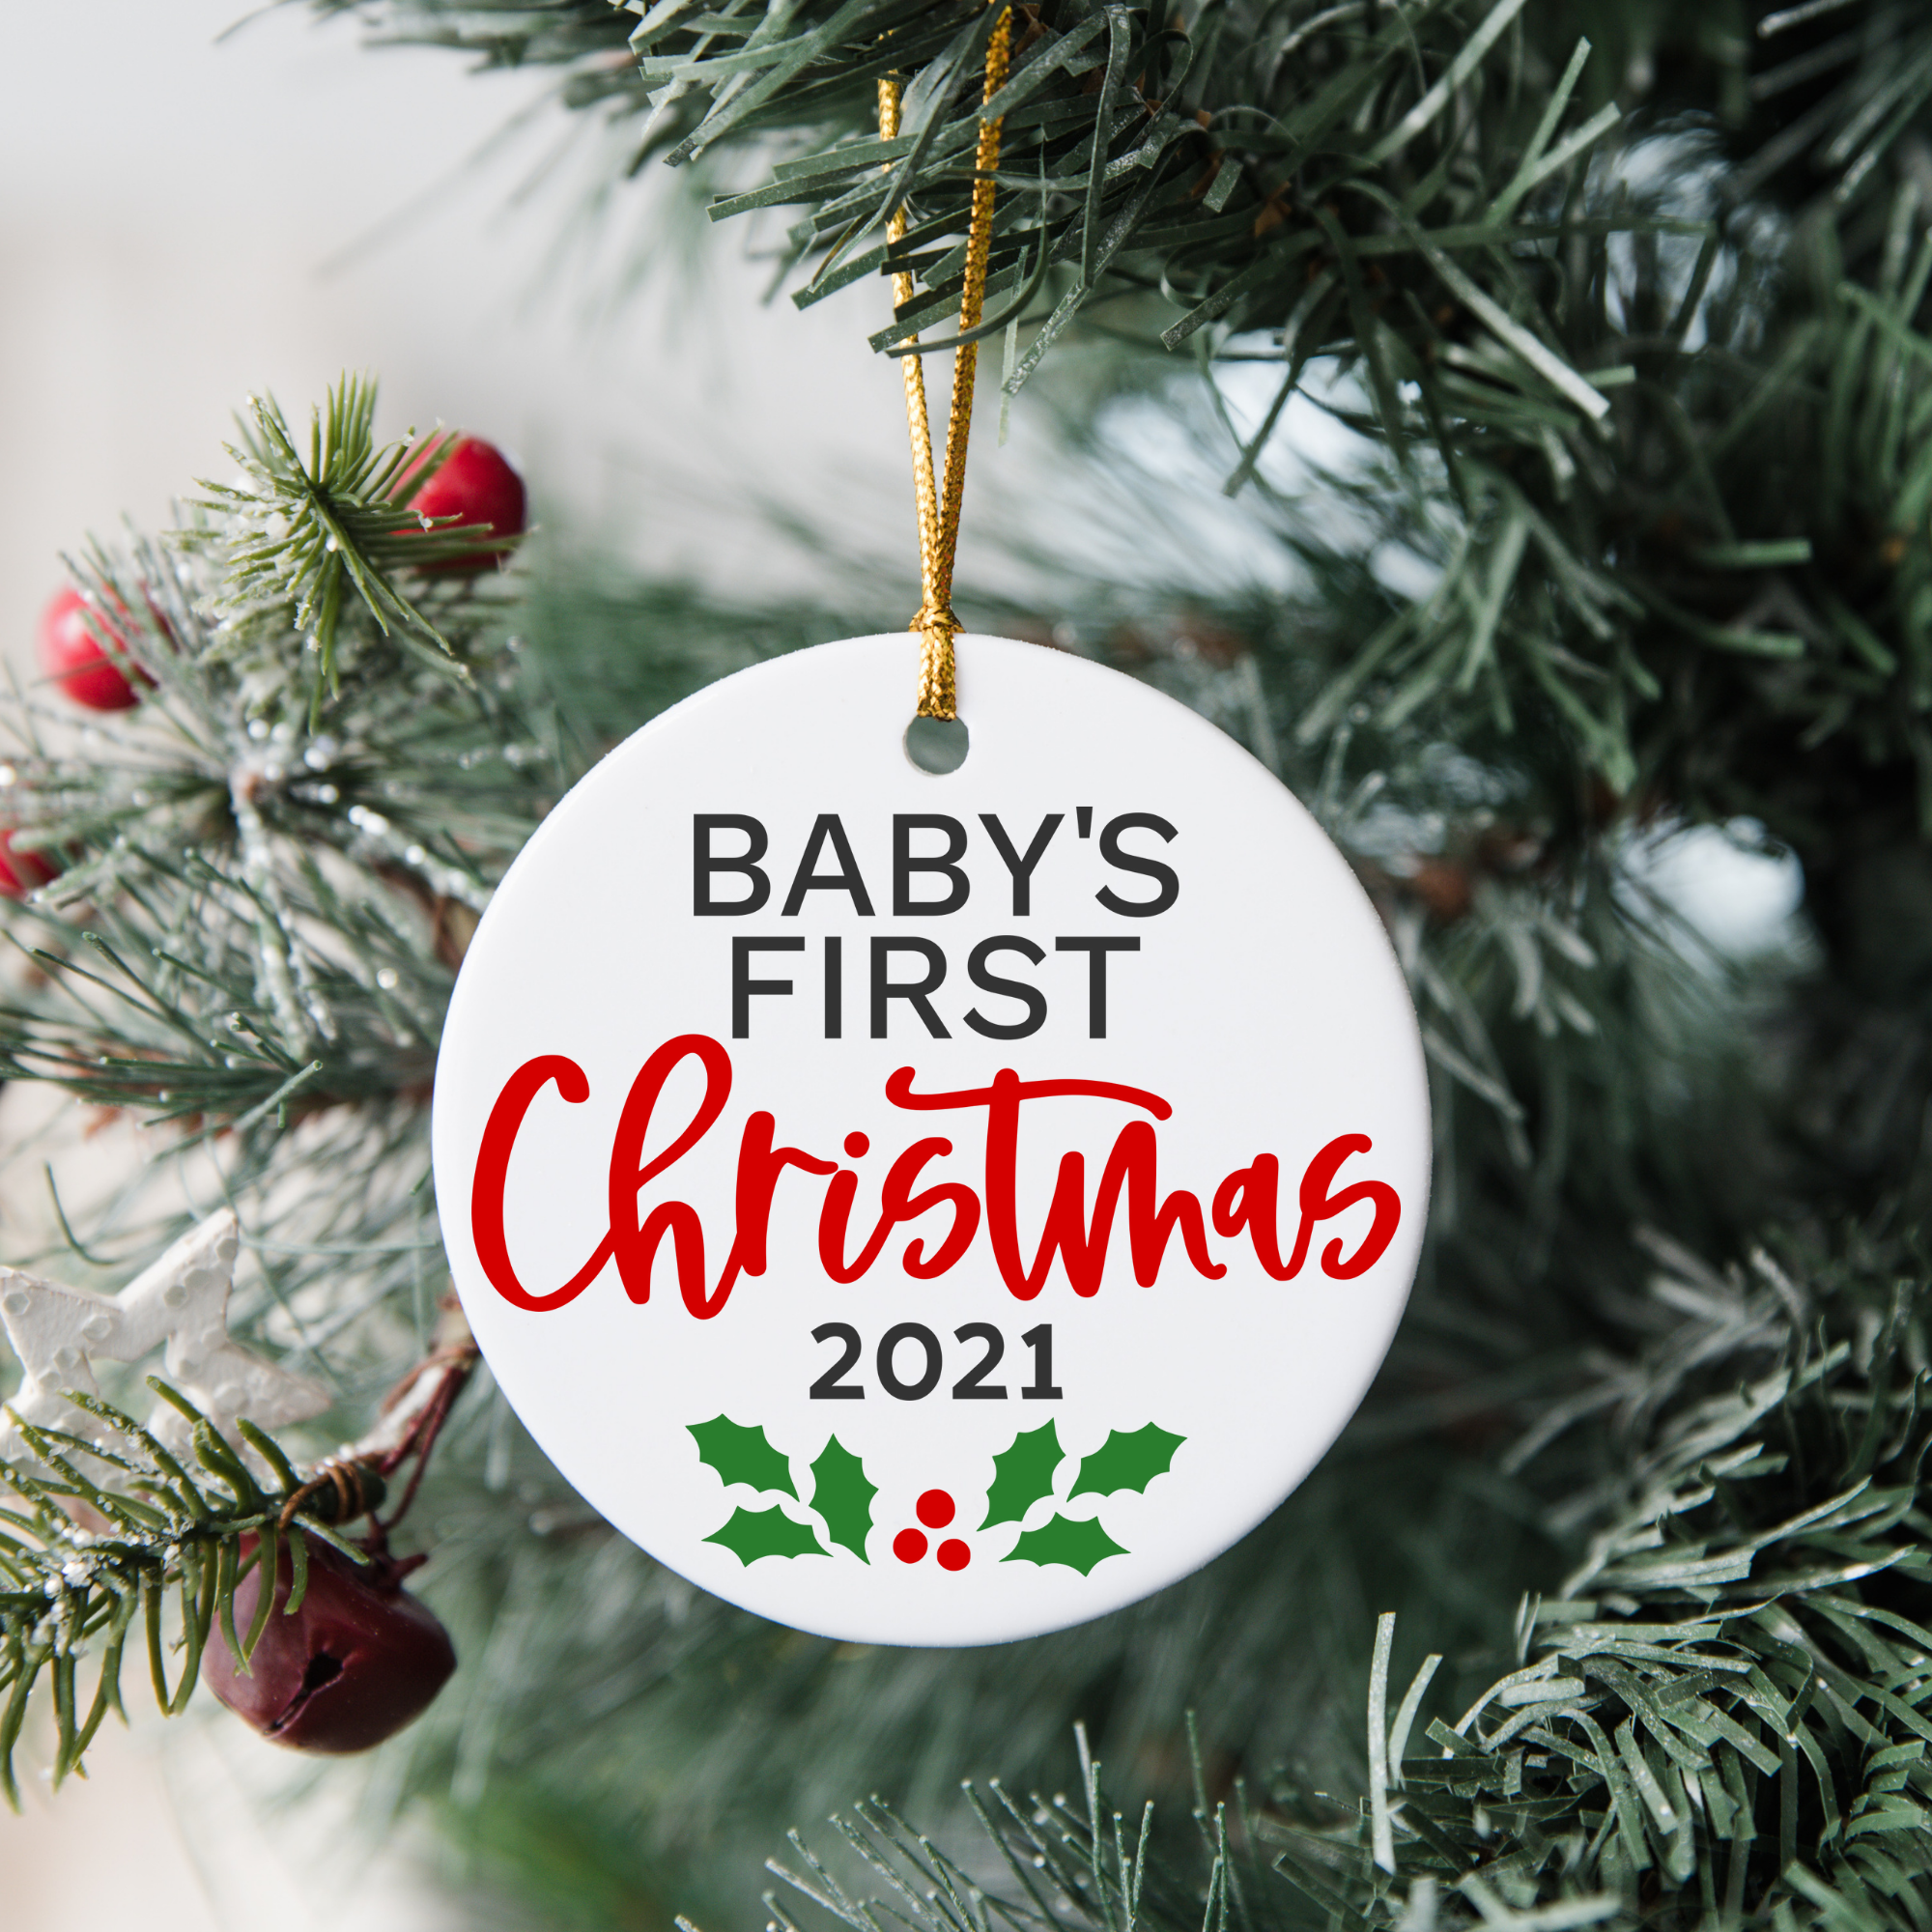 Baby's First Christmas SVG on White Ornament